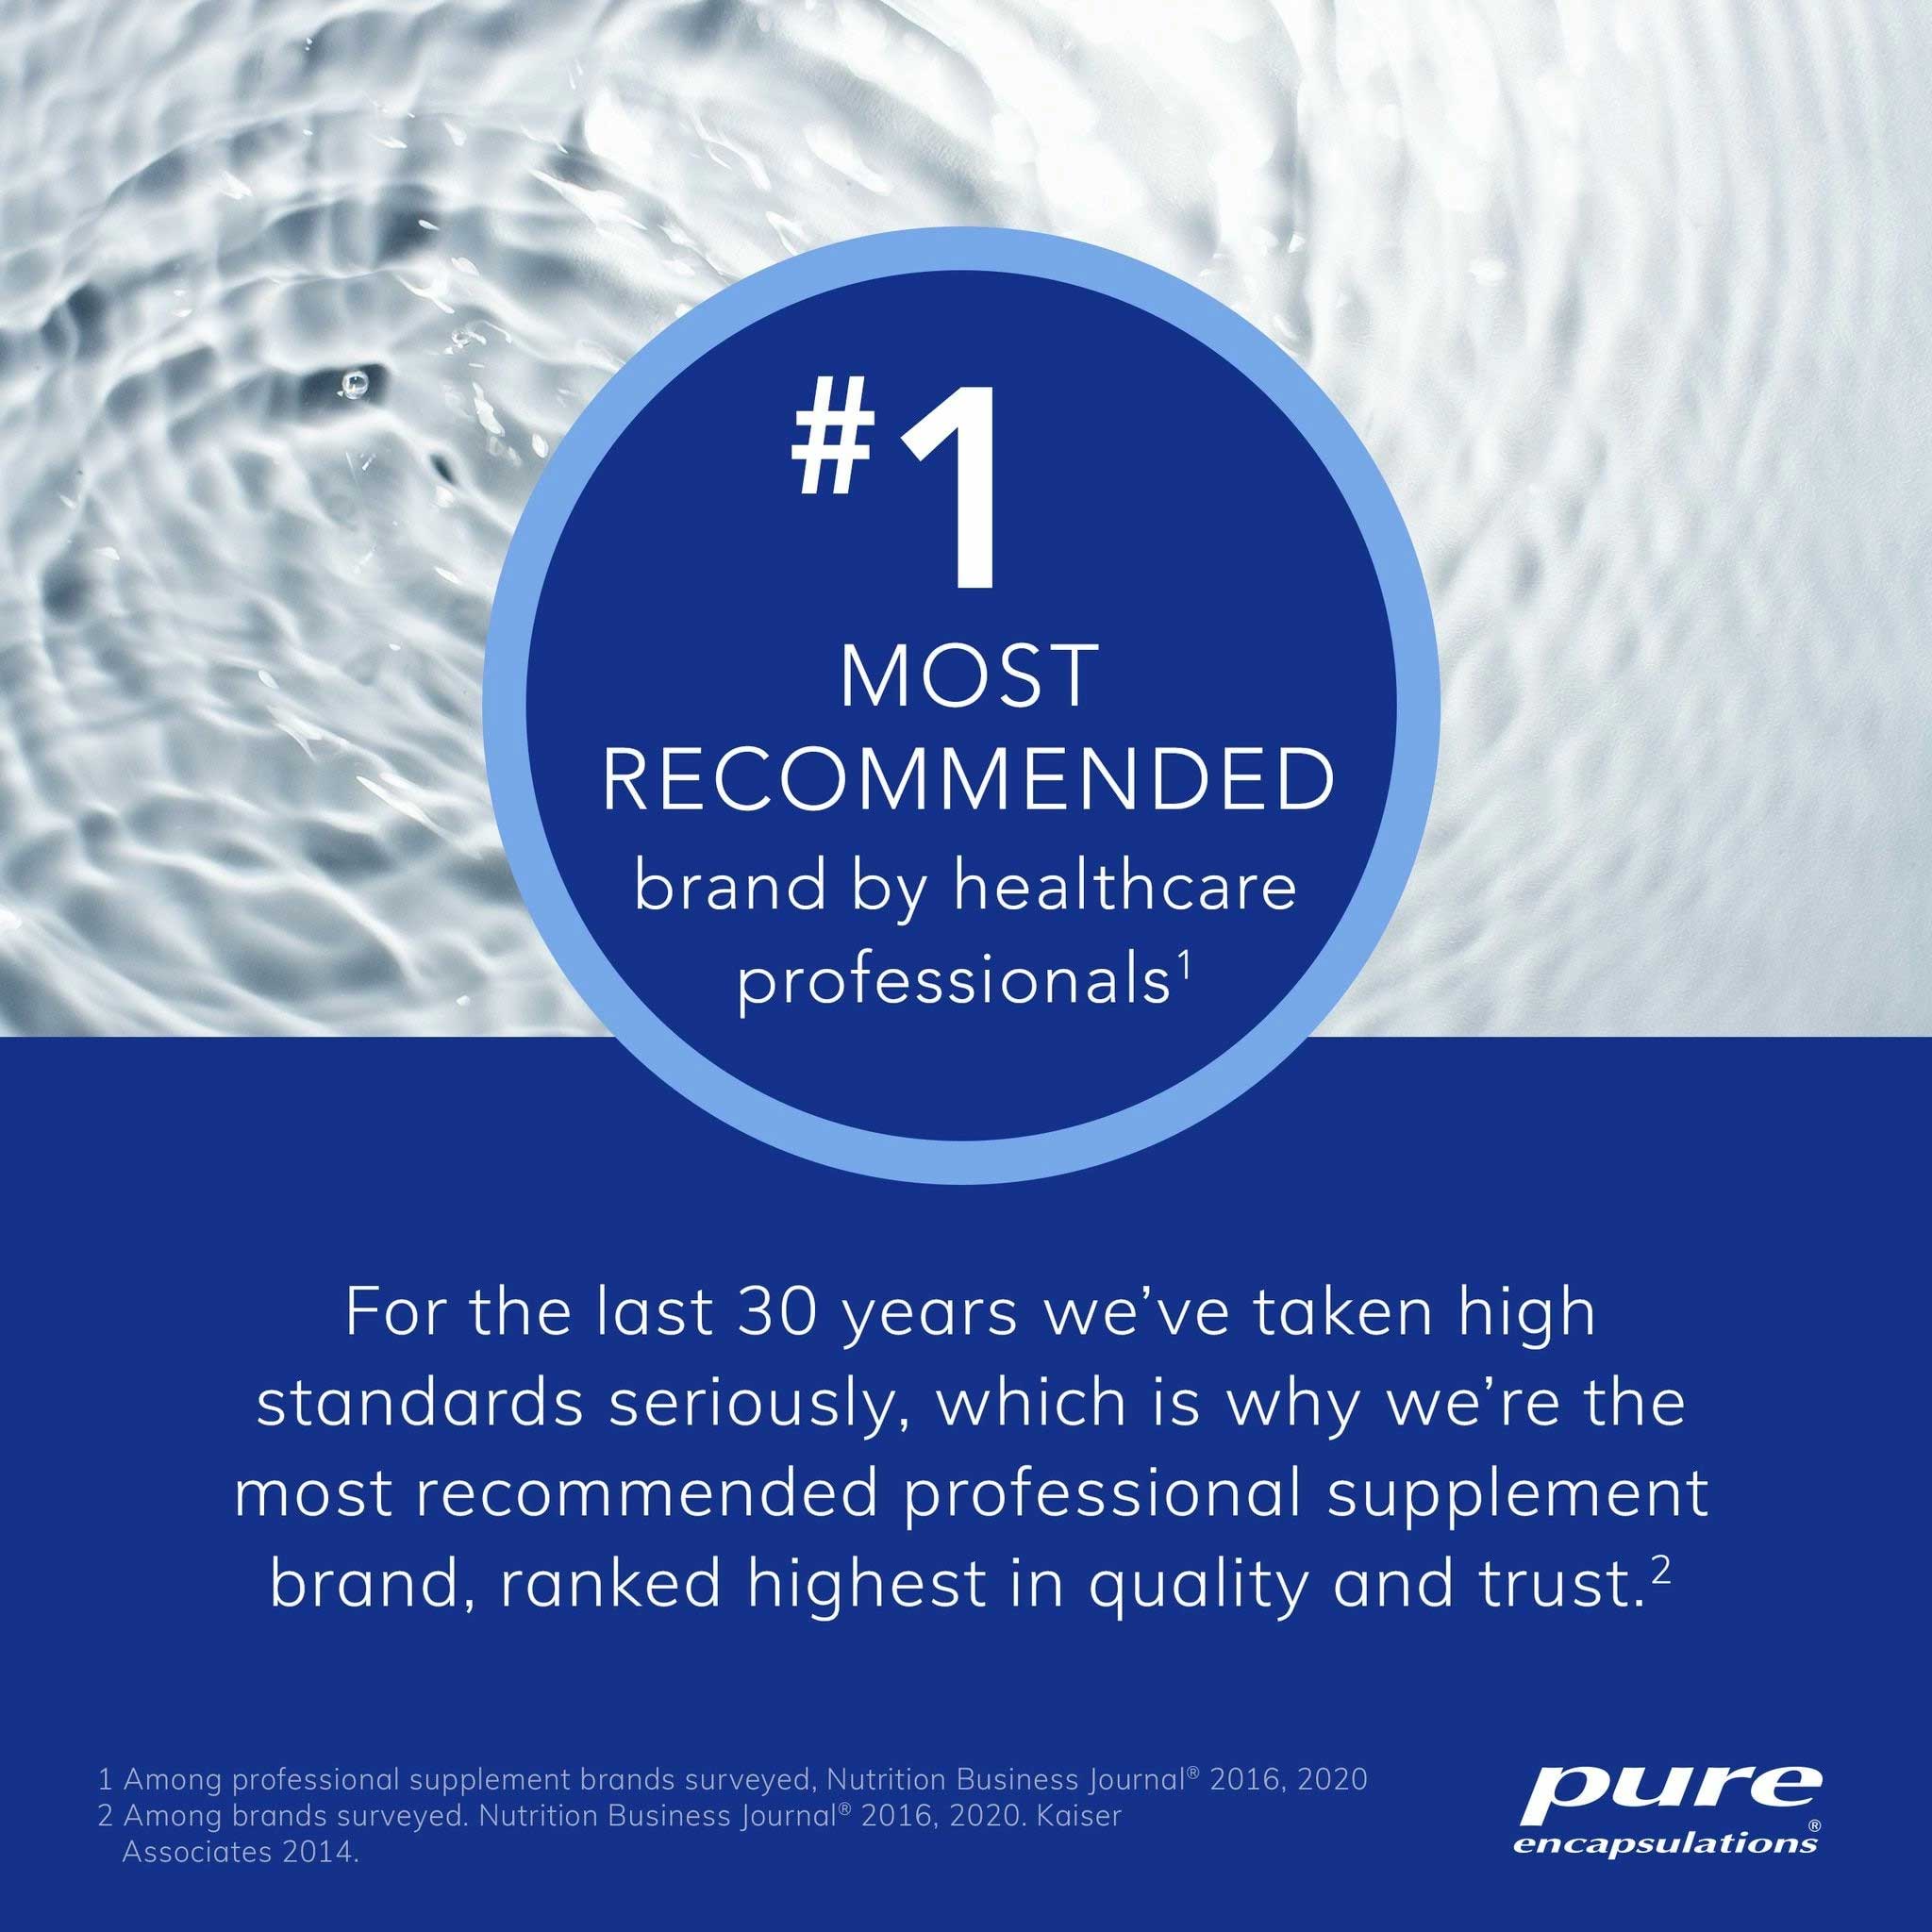 Pure Encapsulations Sereniten Plus Most Recommended Brand